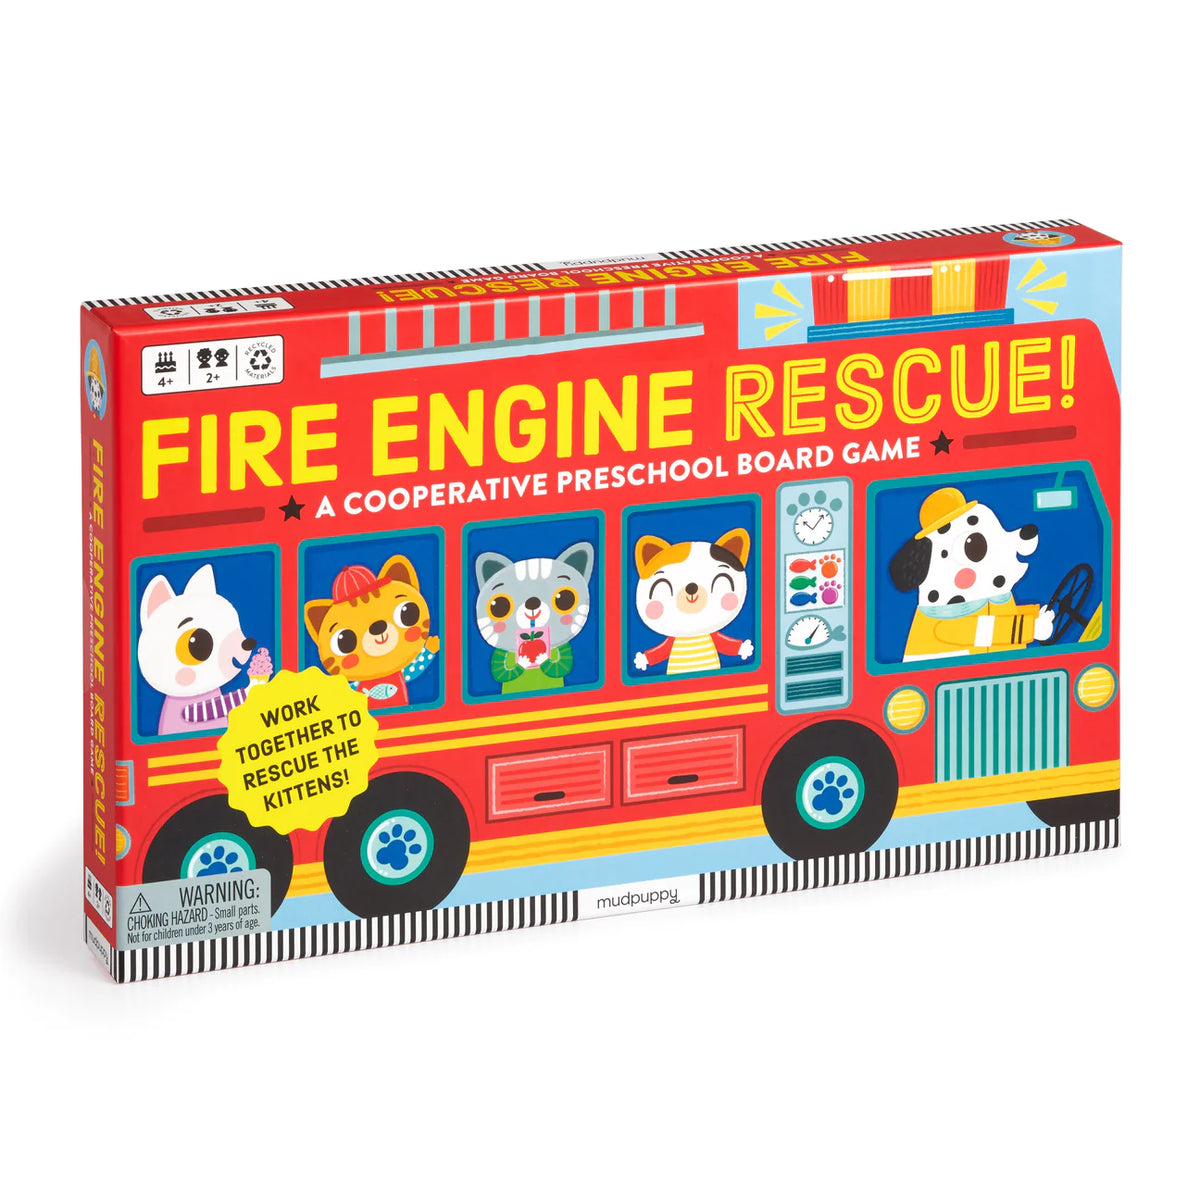 Fire Engine Rescue! Game Cover